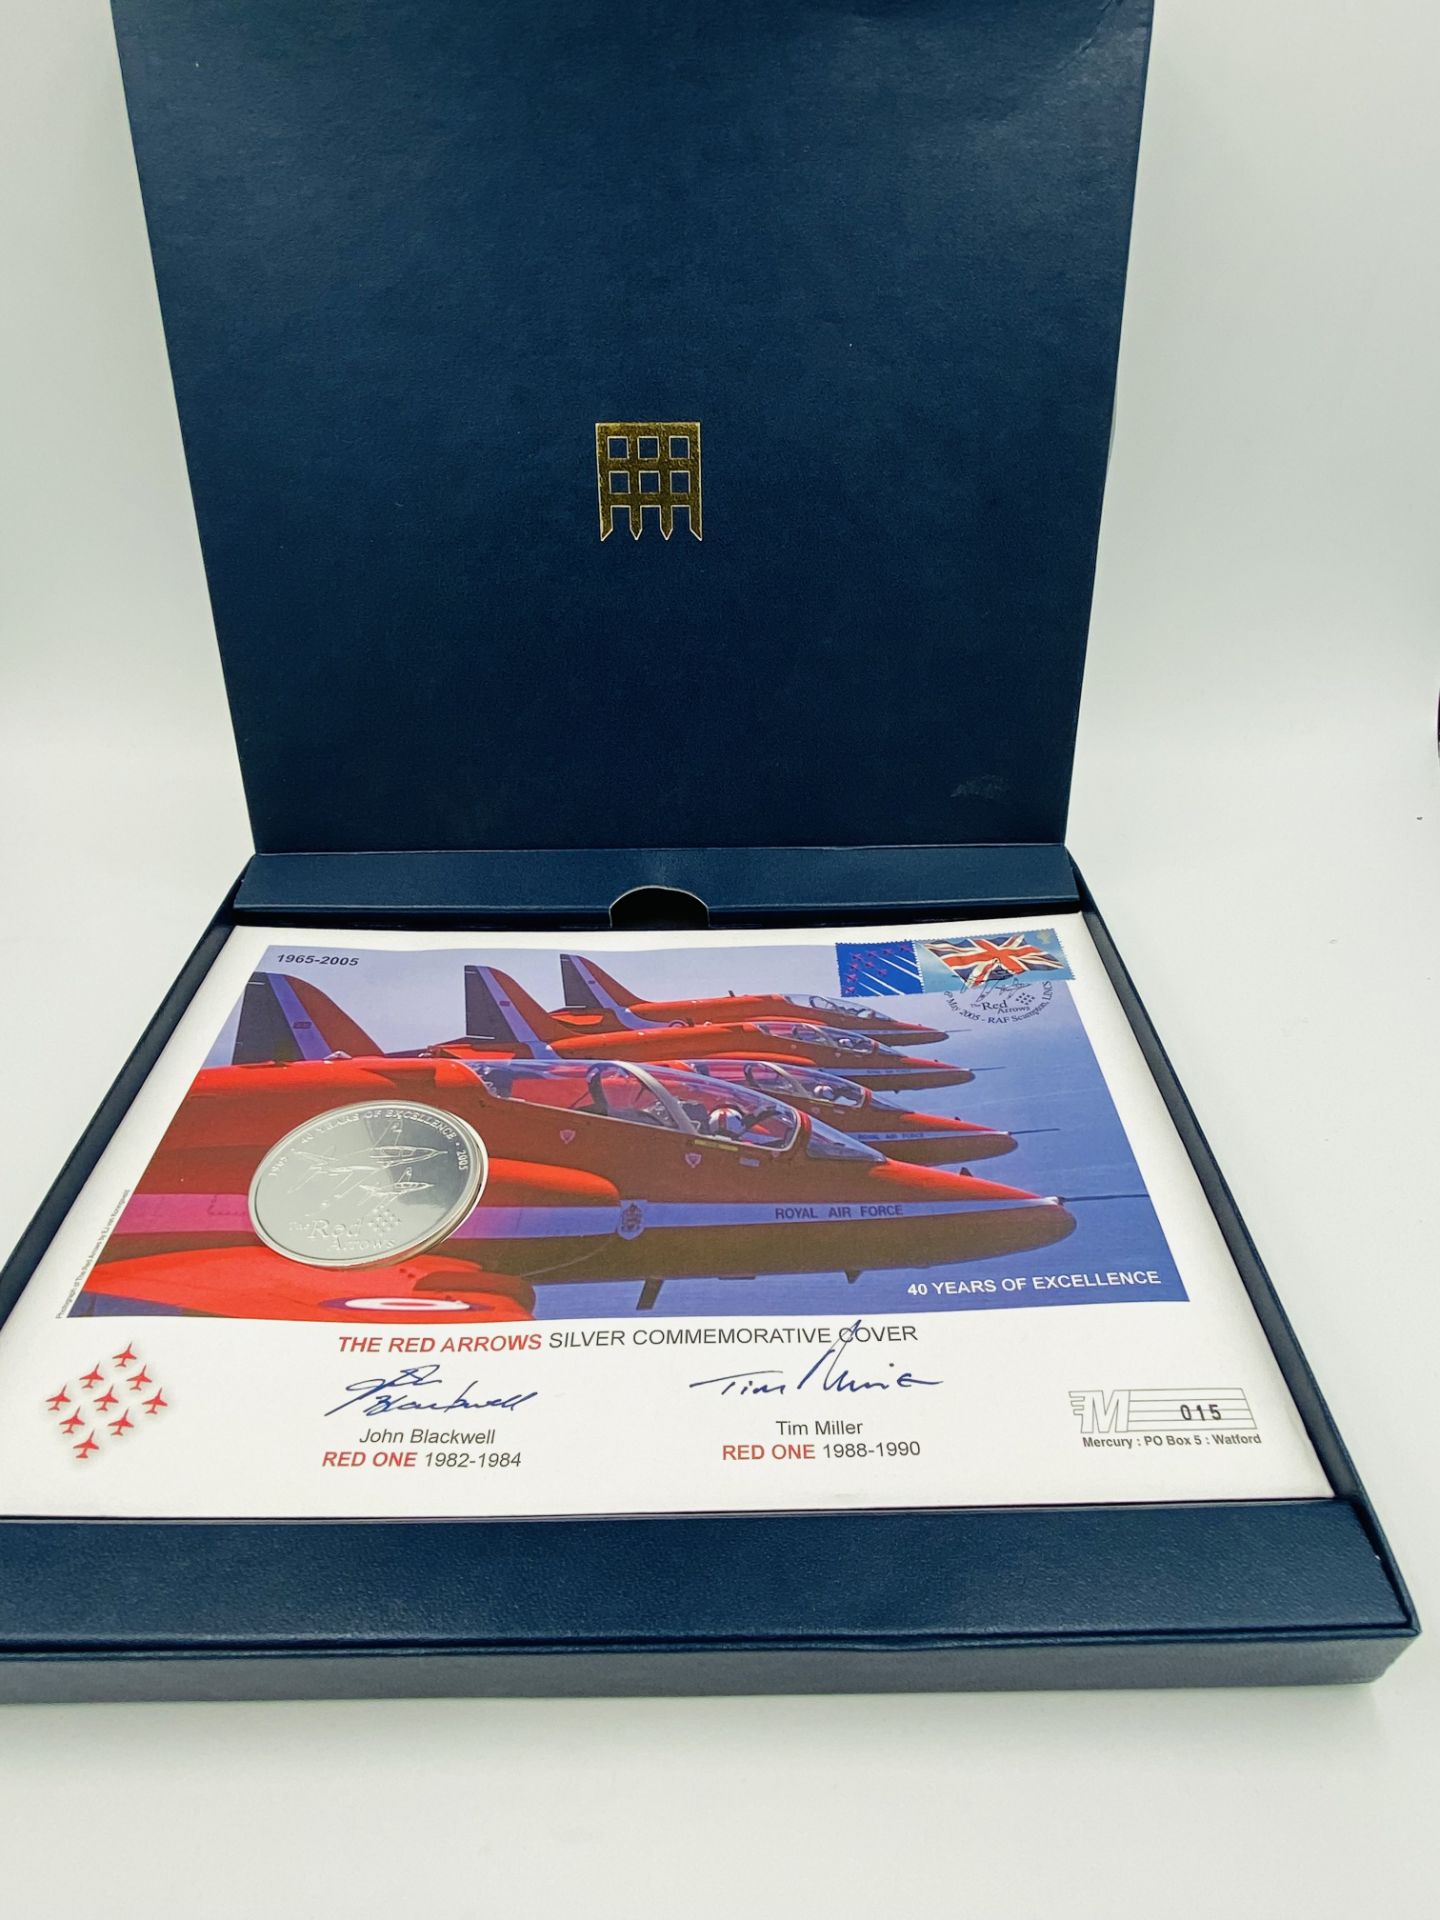 Westminster Coins Red Arrows silver commemorative coin cover - Image 2 of 3